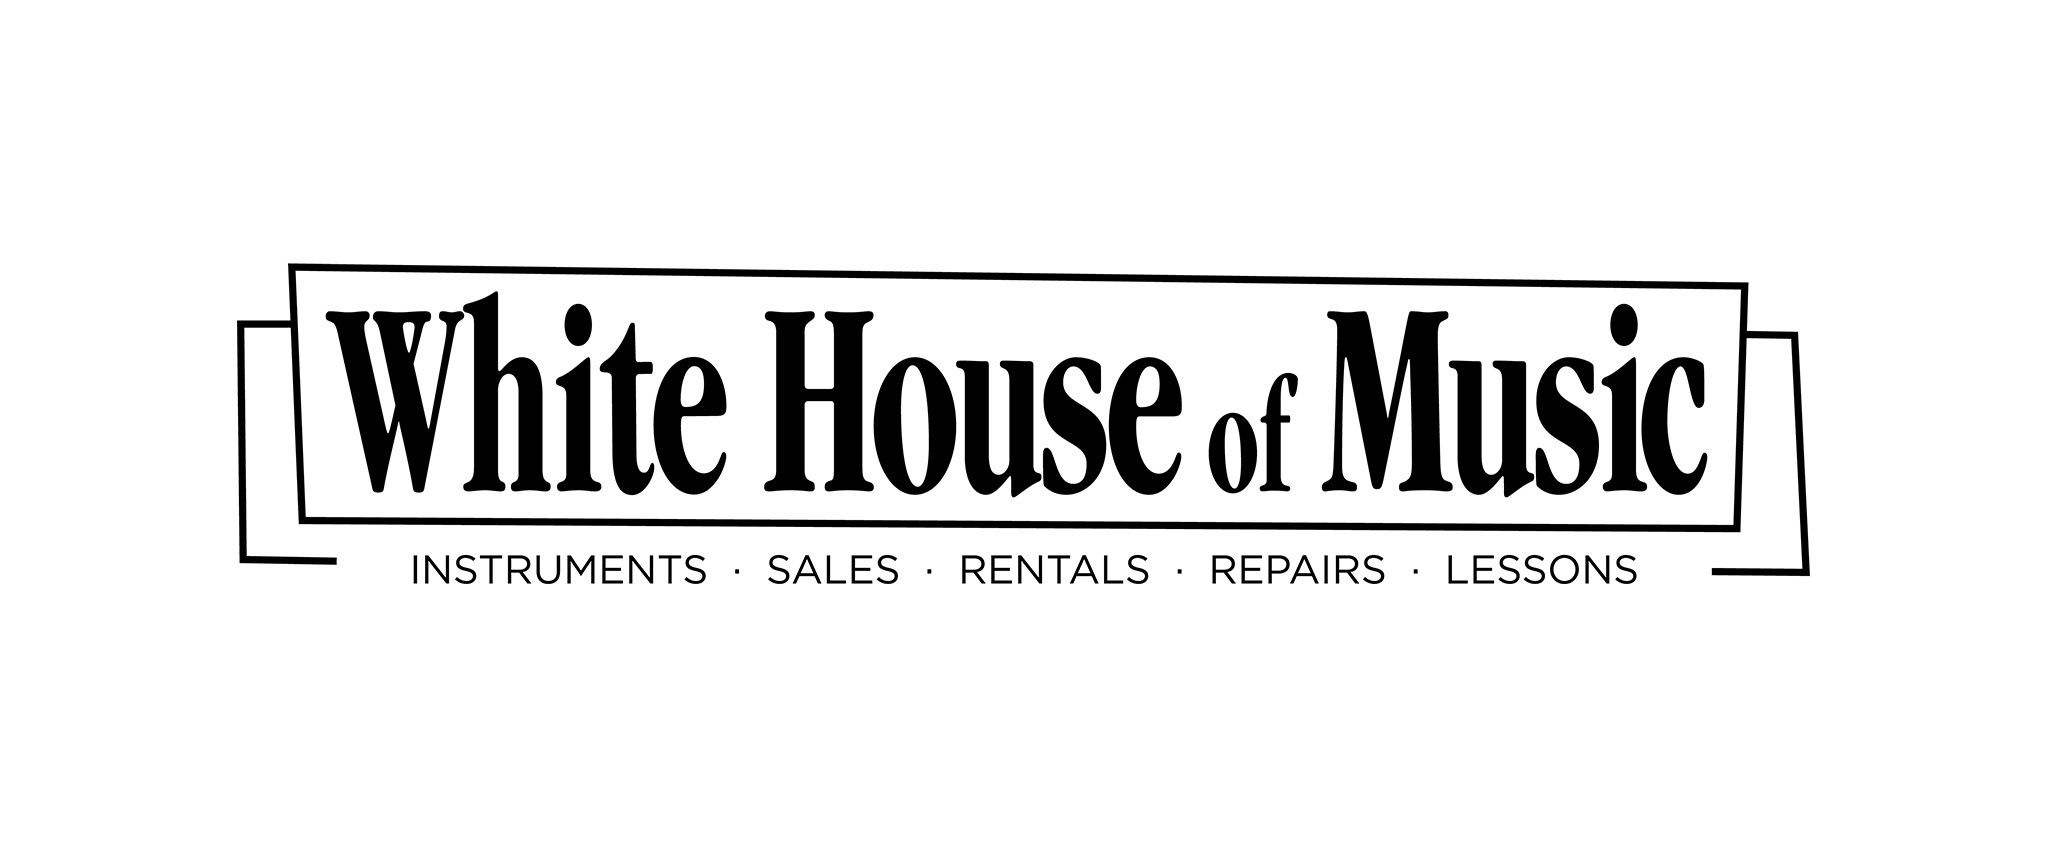 White House of Music Logo - Instruments, Sales, Rentals, Repairs, Lessons.